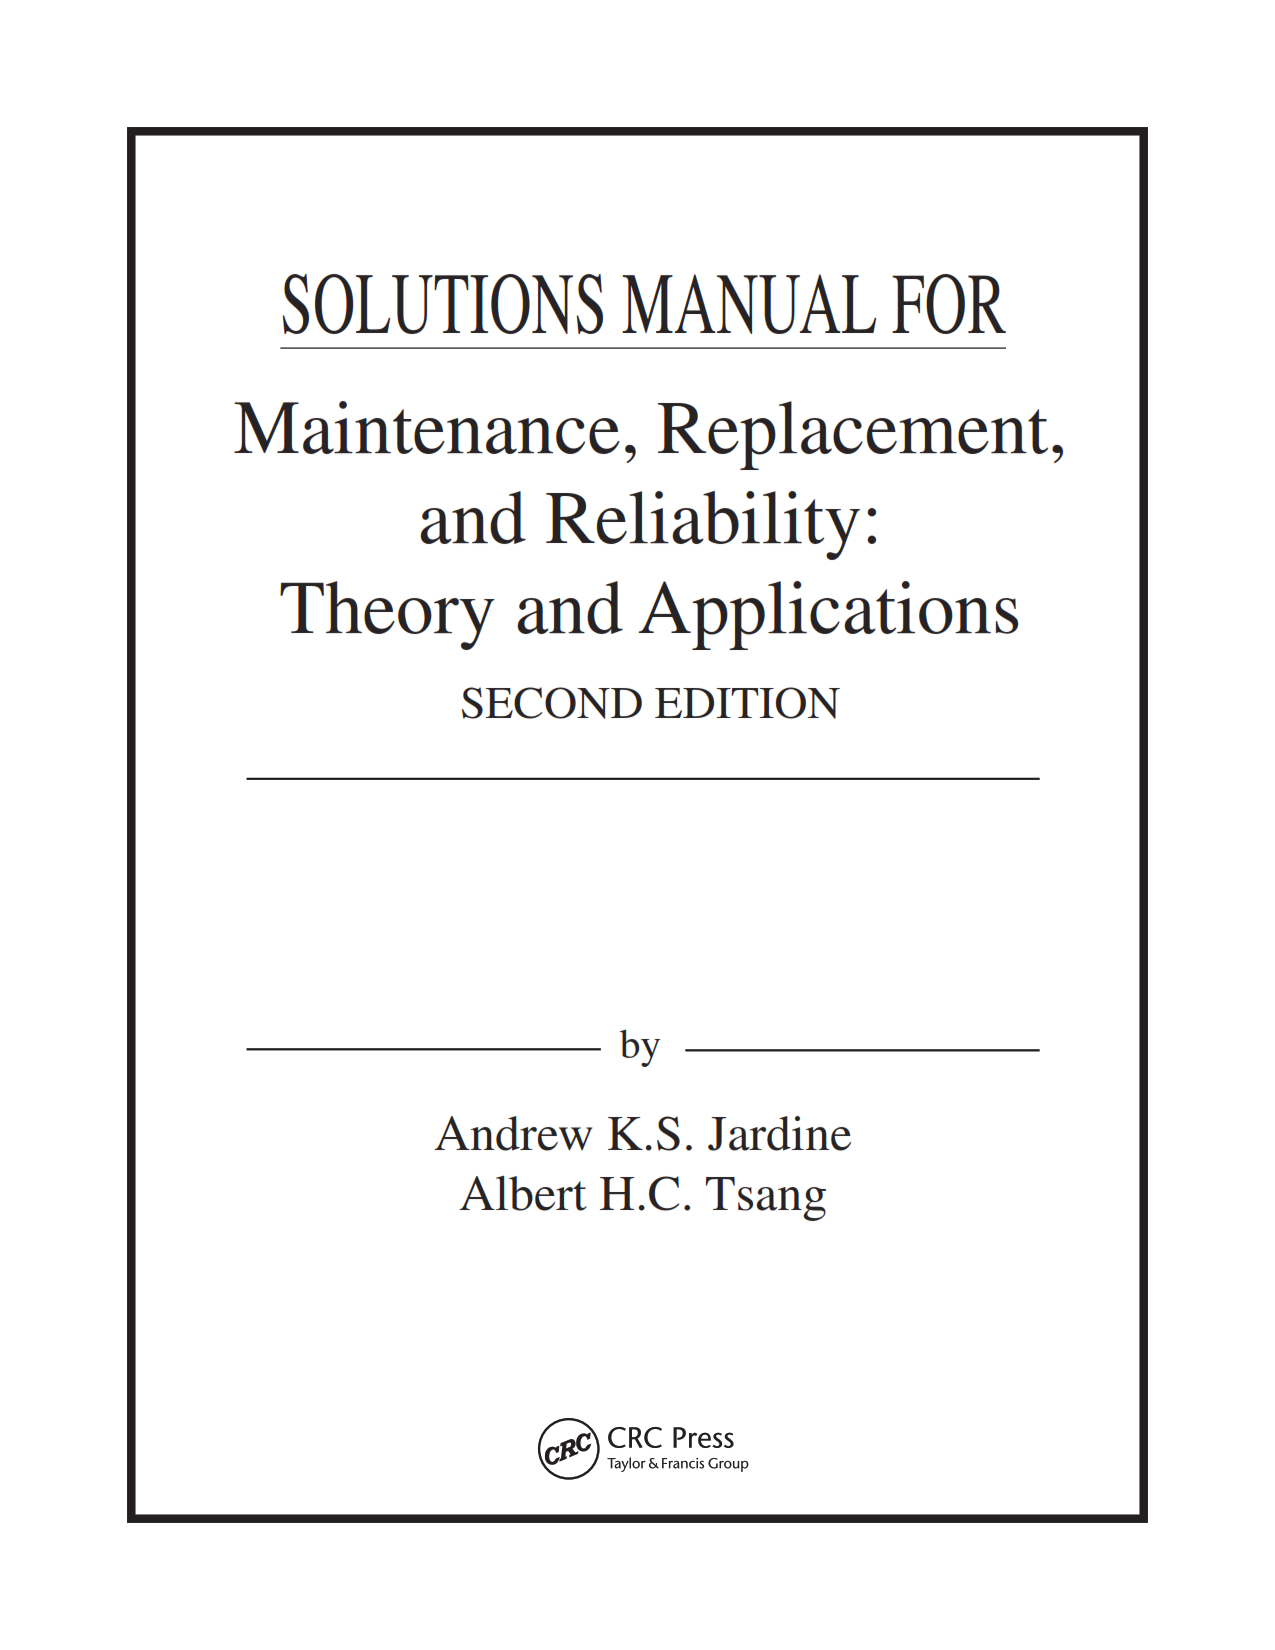 Download free maintenance replacement and reliability theory and applications second edition by Jardine & Tsang solution manual | solutions